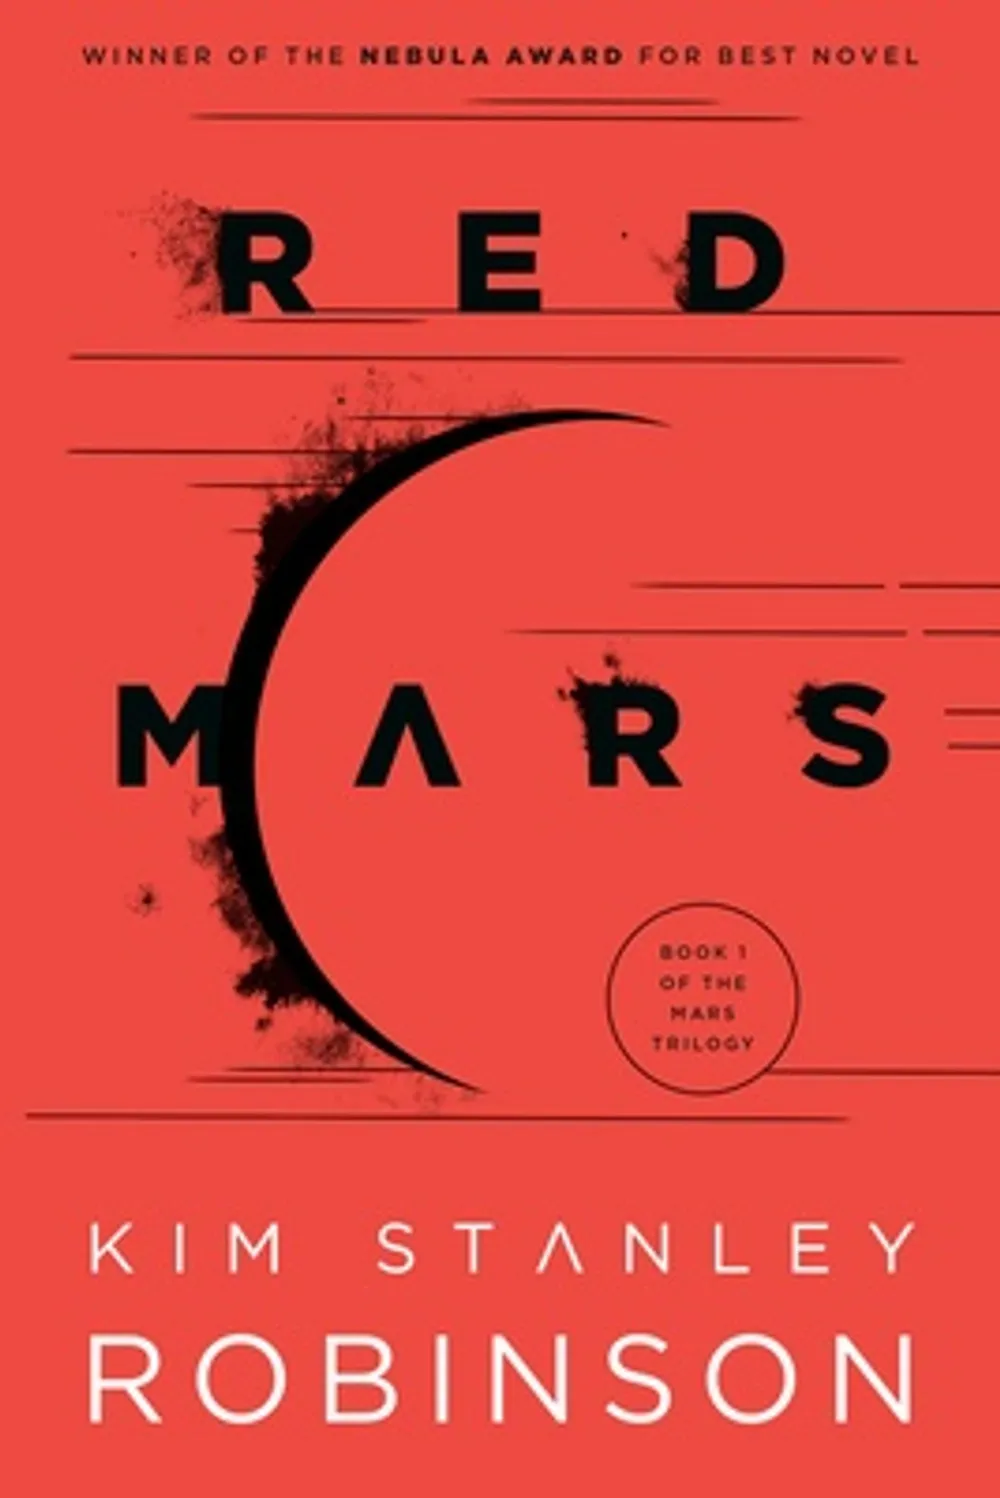 Red Mars, by Kim Stanley Robinson